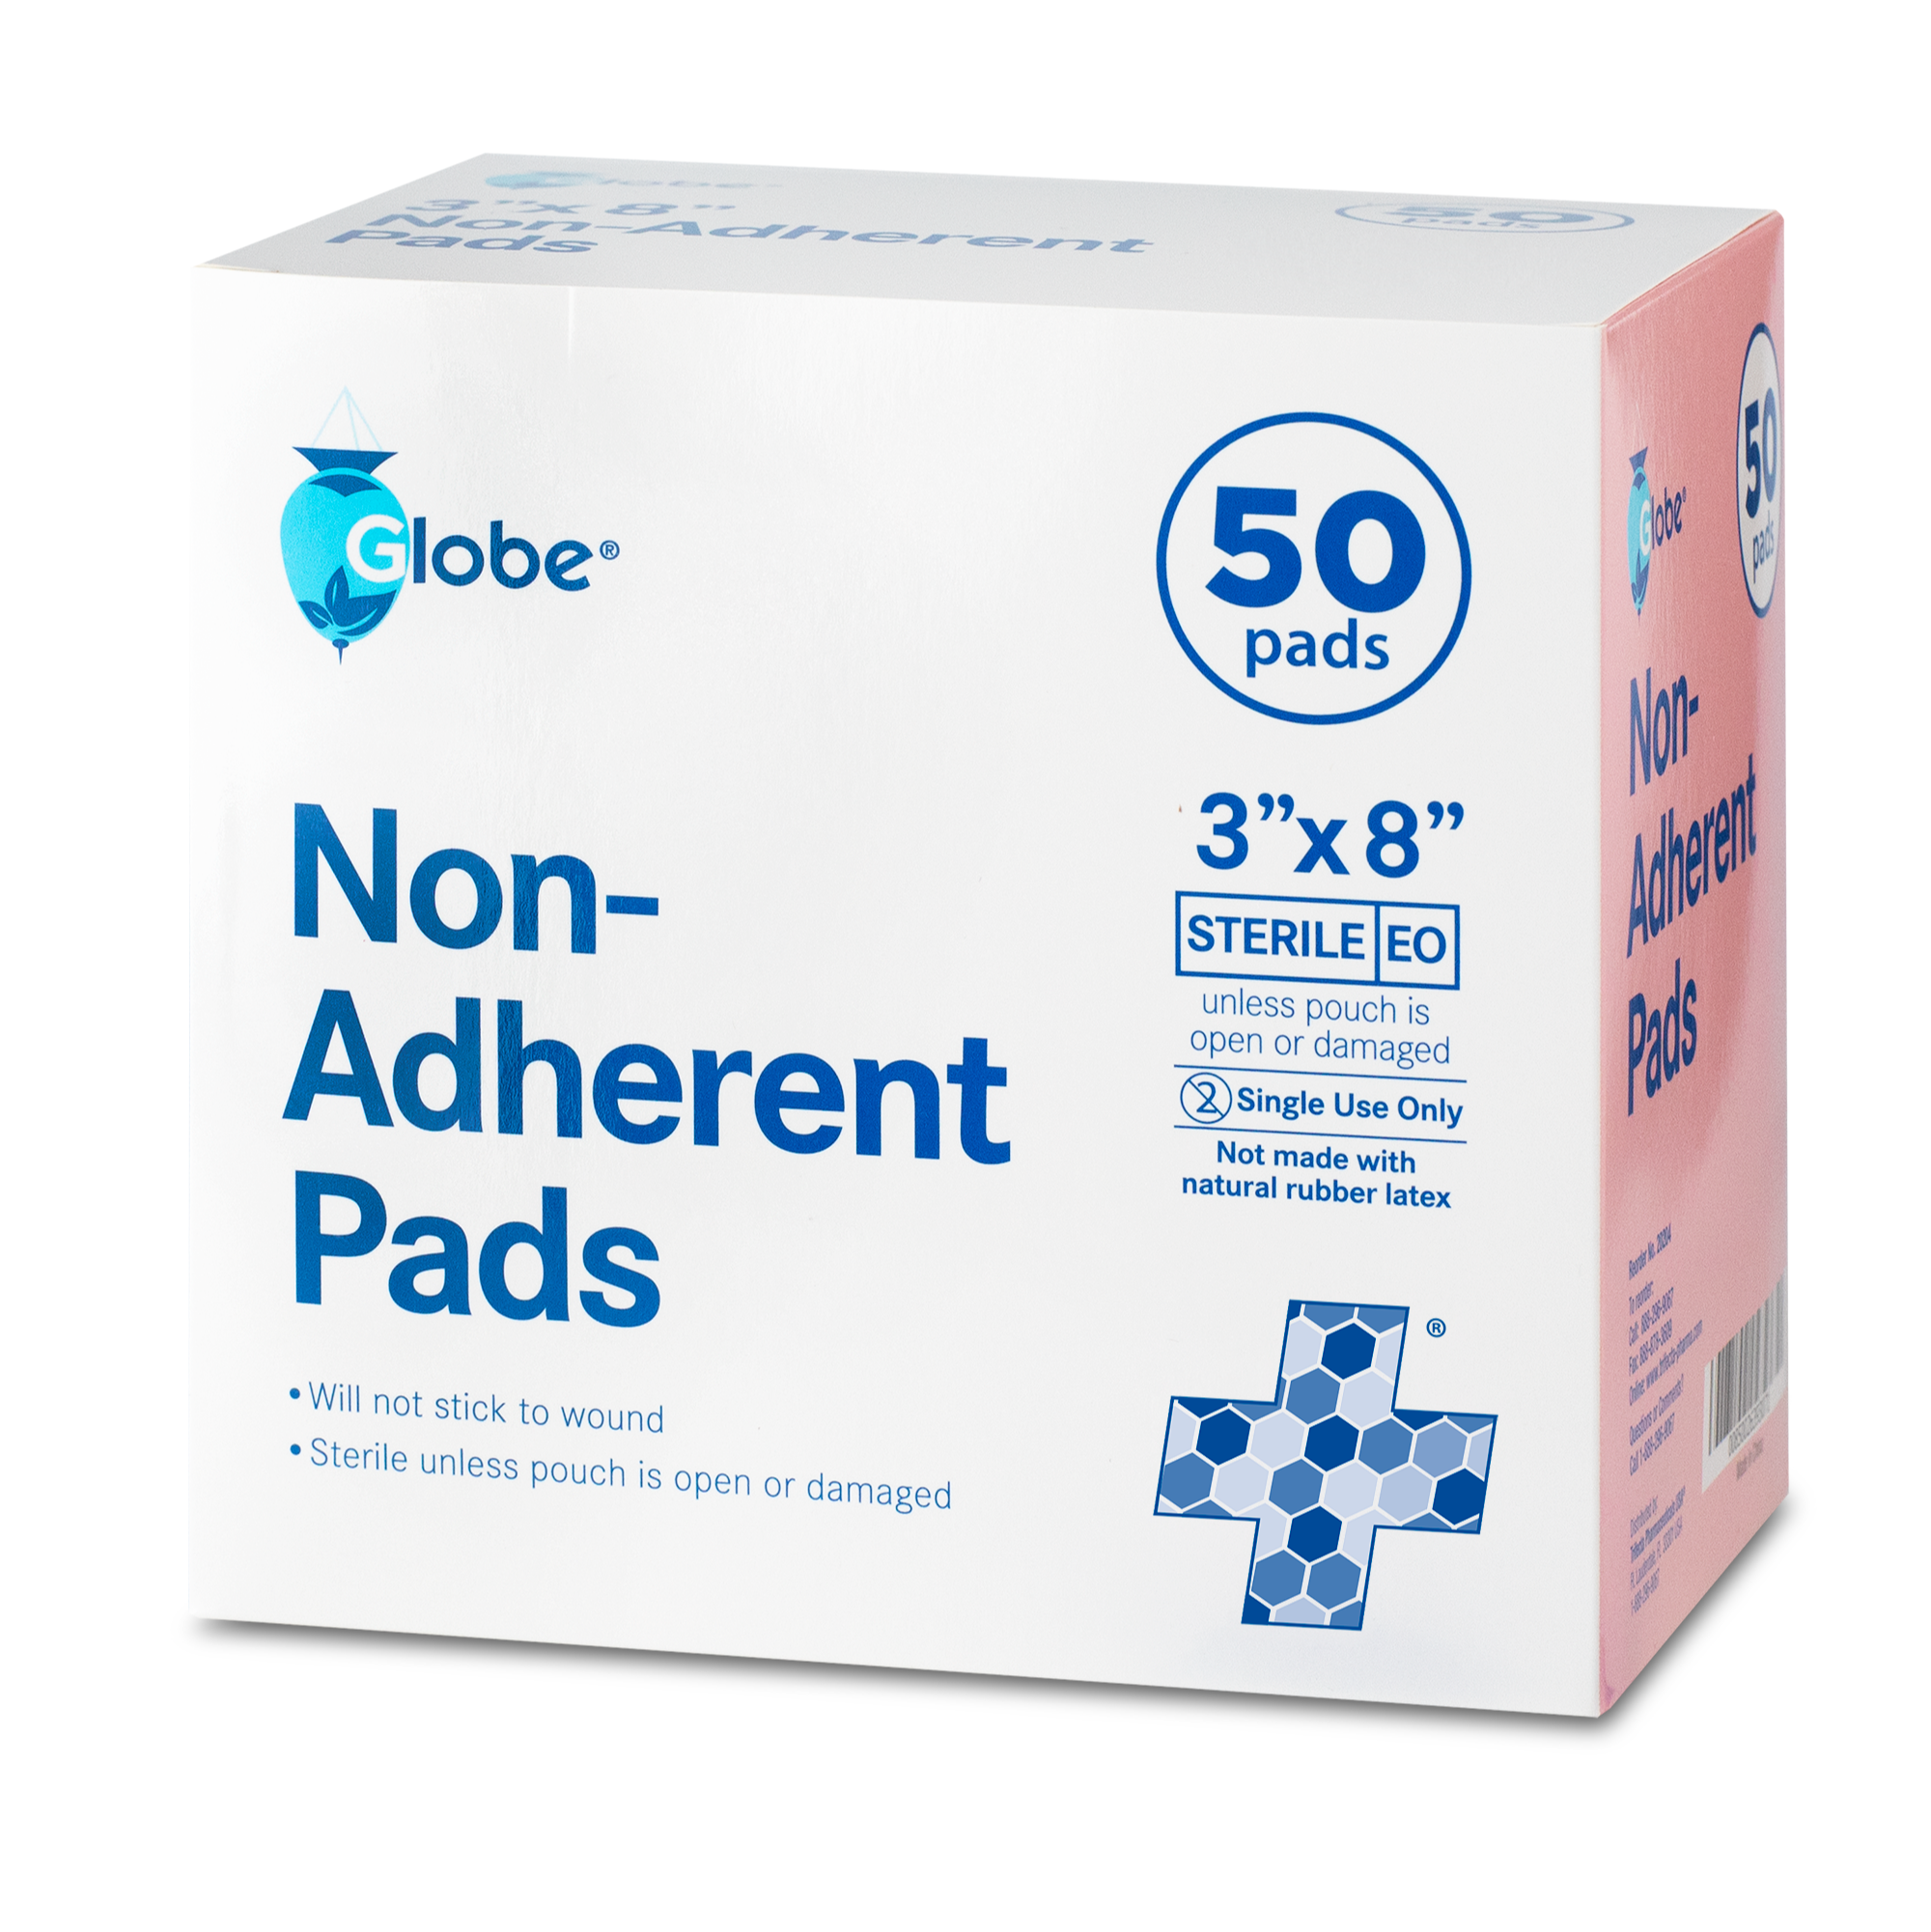 Globe Advanced Sterile Non-Adherent Pads| 50-Pack, 3” x 8”| Non-Adhesive Wound Dressing| Highly Absorbent & Non-Stick, Painless Removal-Switch| Indivi 980